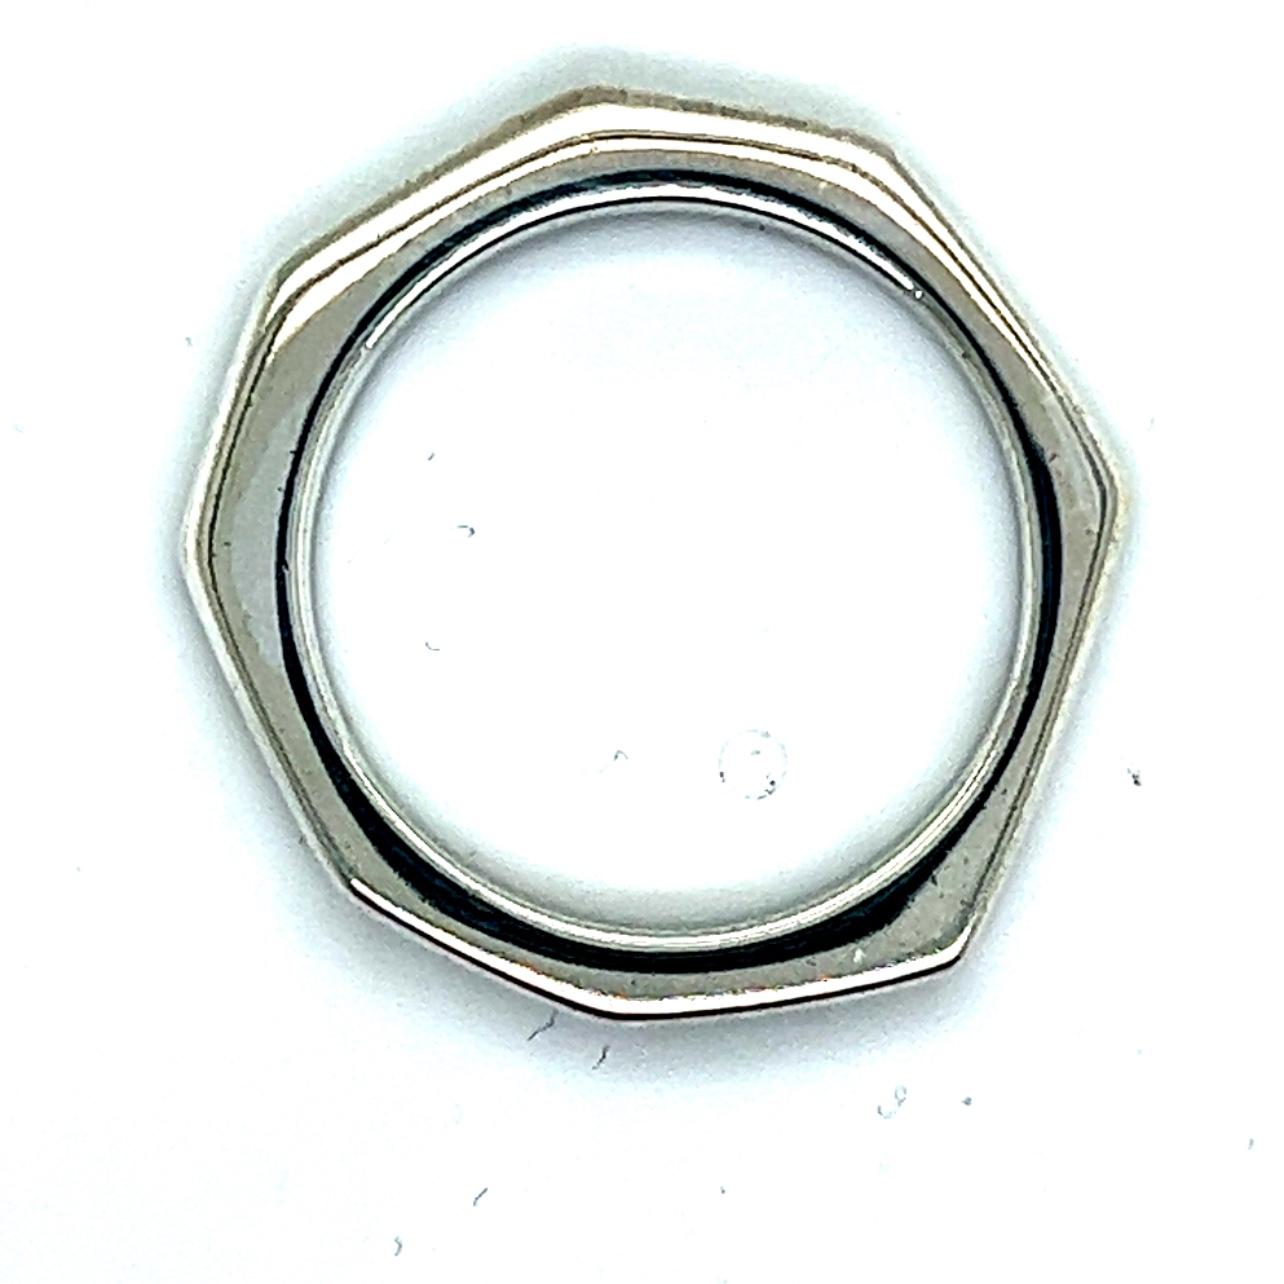 Gucci Estate Abstract Ring Size 10.5 Sterling Silver G5

This elegant Authentic Gucci ring is made of sterling silver and has a weight of 6.5 grams.

MADE IN ITALY

TRUSTED SELLER SINCE 2002

PLEASE SEE OUR HUNDREDS OF POSITIVE FEEDBACKS FROM OUR